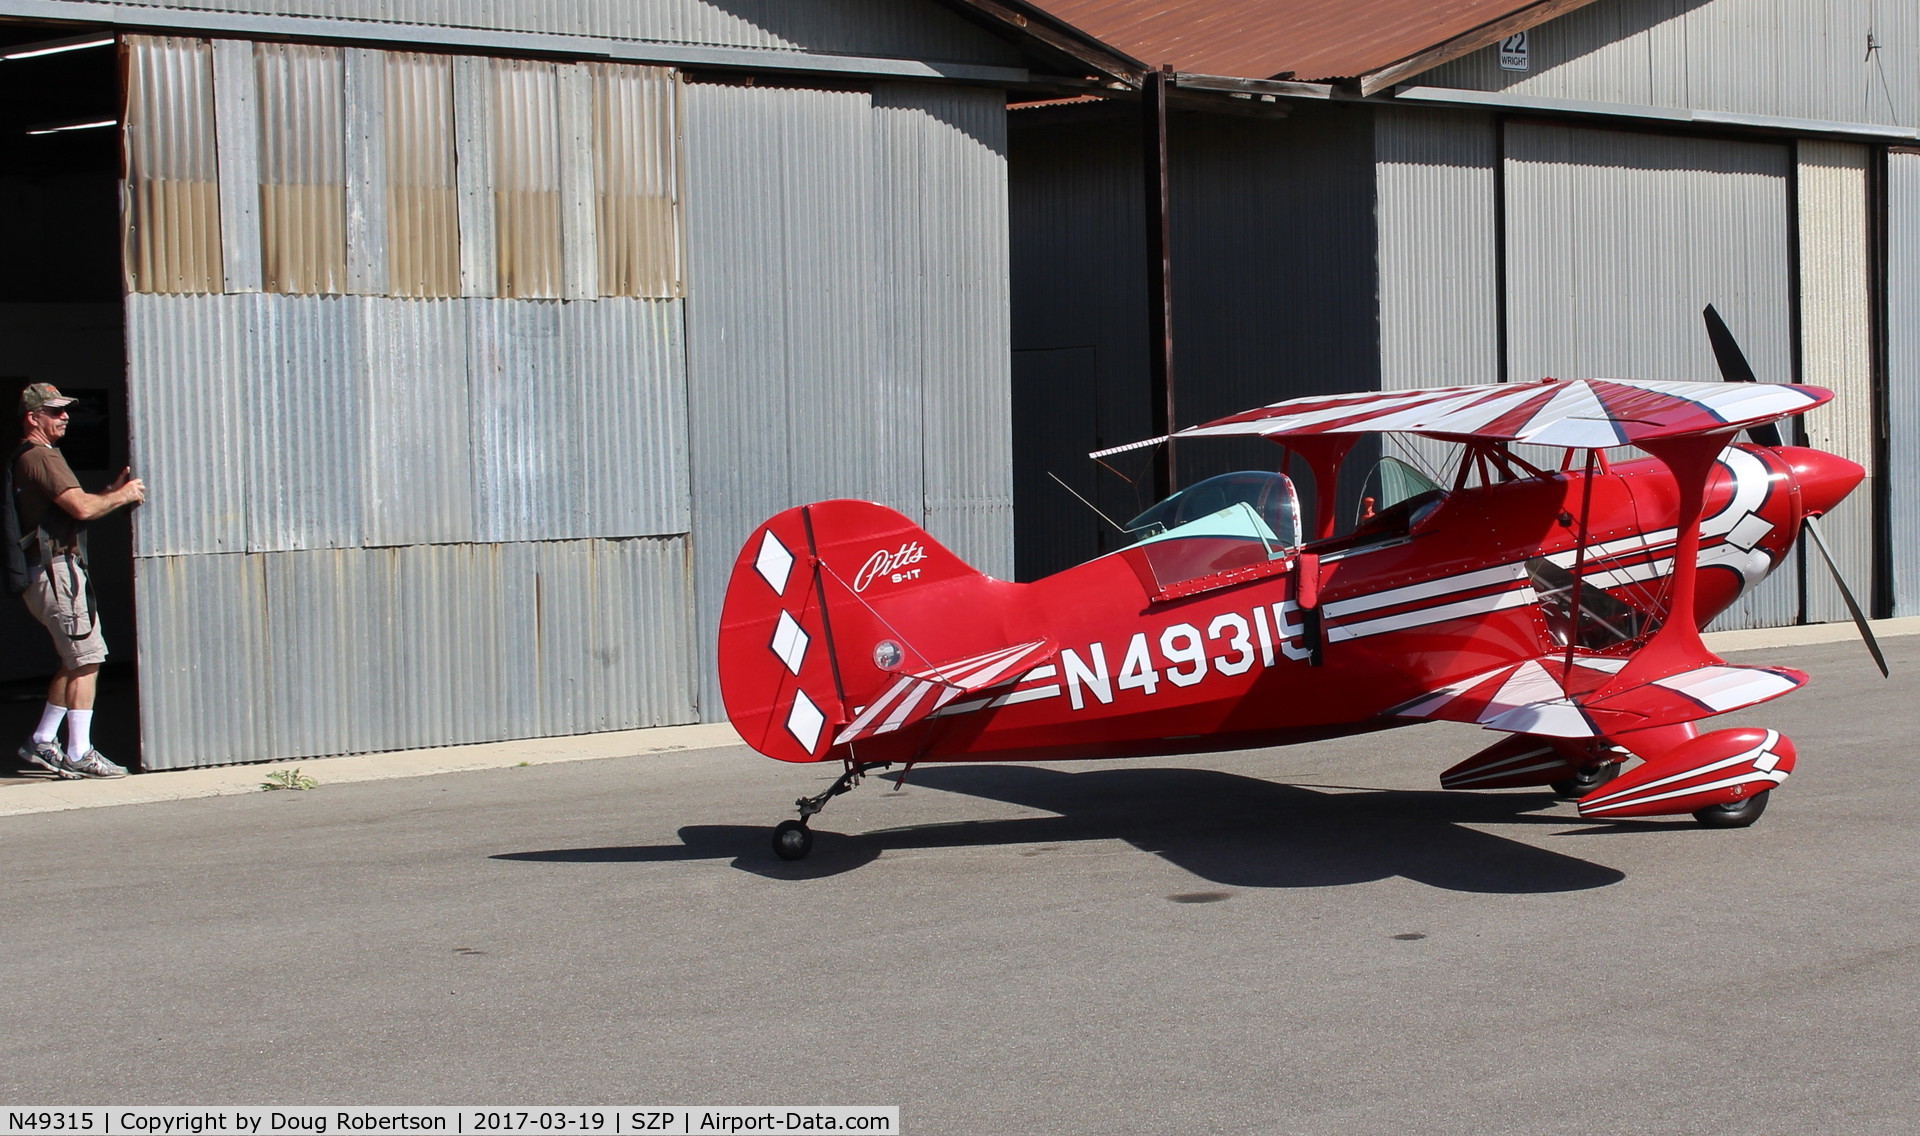 N49315, 1983 Pitts S-1T Special C/N 1013, 1983 Pitts Aerobatics S-1T SPECIAL, Lycoming AEIO-360 180 Hp